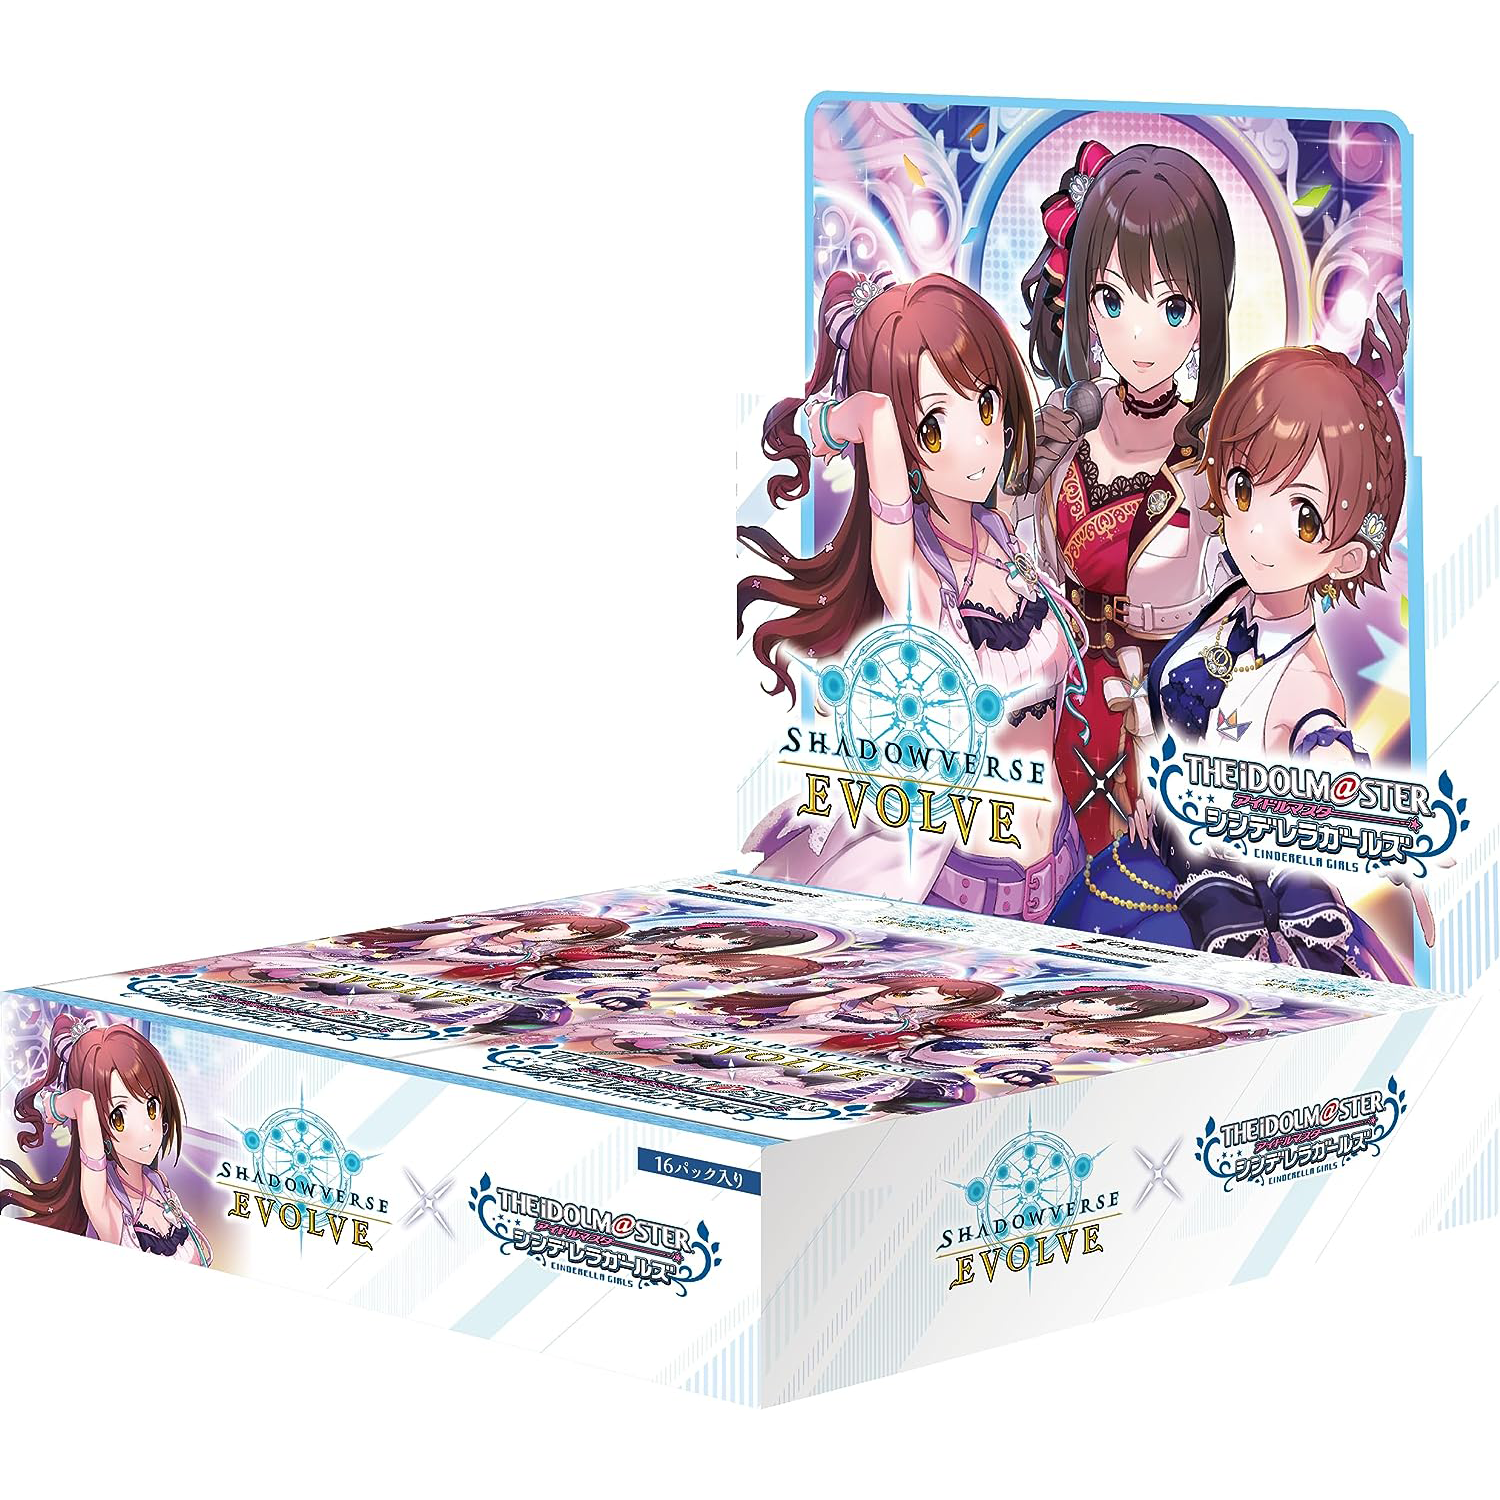 SHADOWVERSE EVOLVE Collabo pack ｢THE iDOLM@STER CINDERELLA GIRLS｣ Box